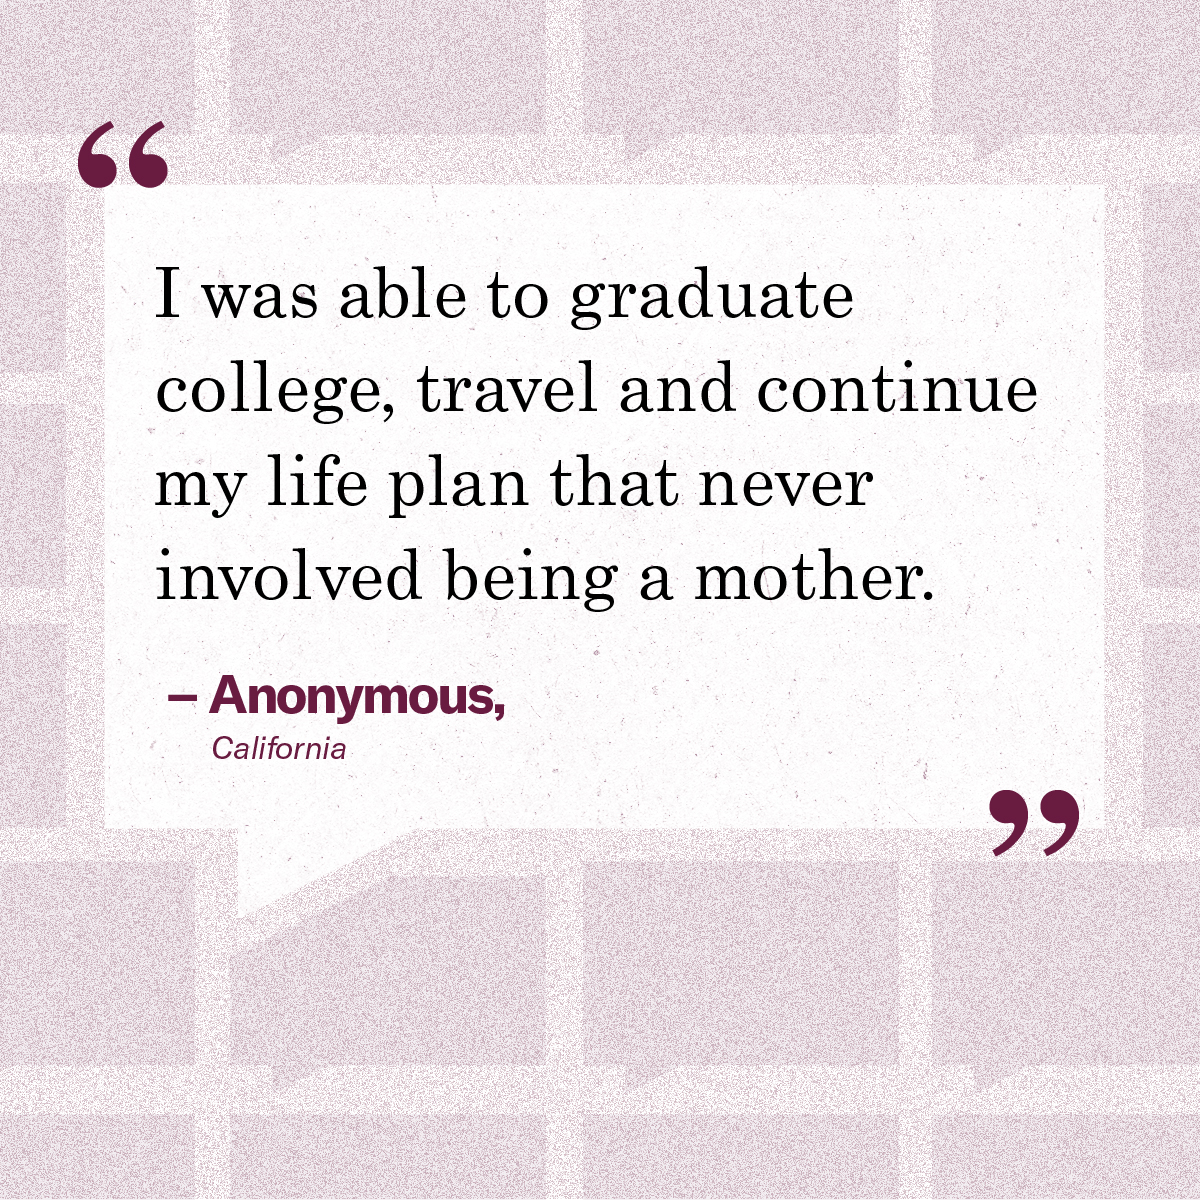 “I was able to graduate college, travel and continue my life plan that never involved being a mother.” – Anonymous, California